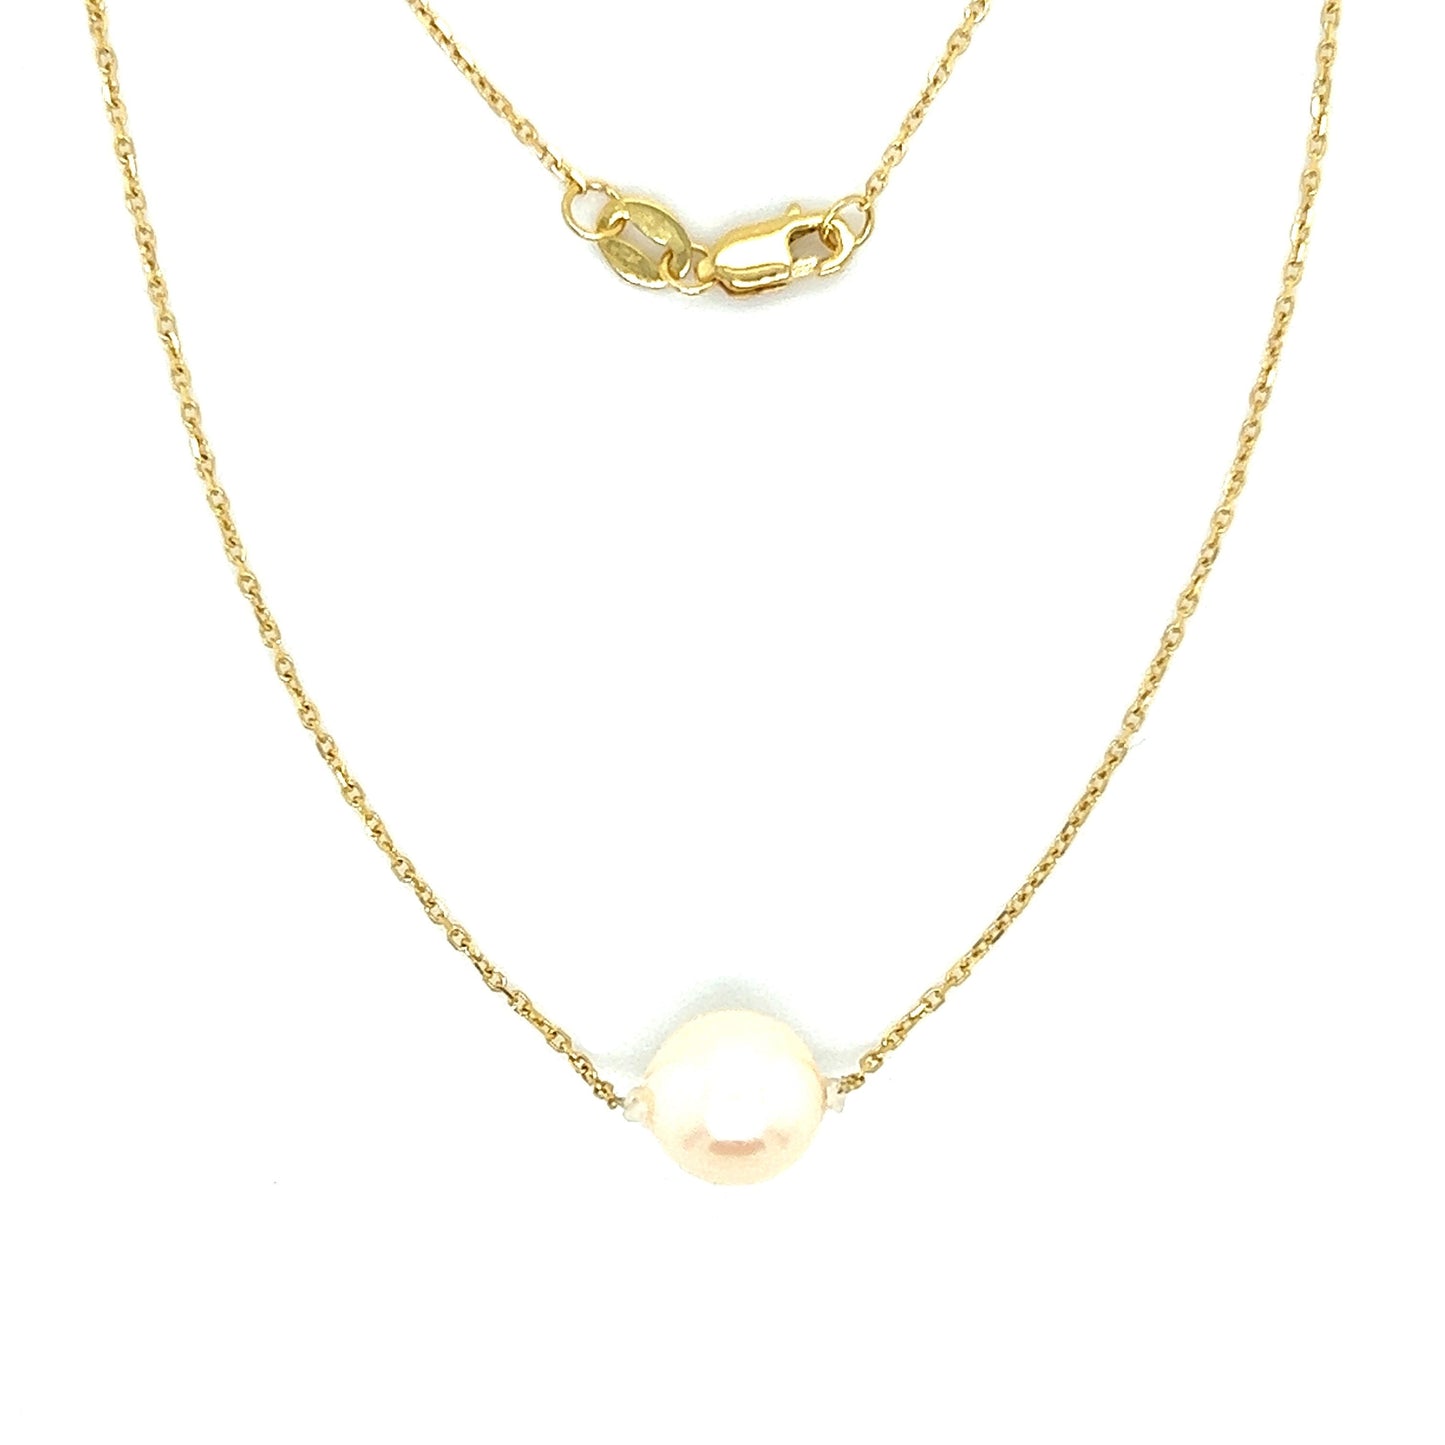 Add-a-Pearl Necklace with One 8mm White Pearl in 10K Yellow Gold